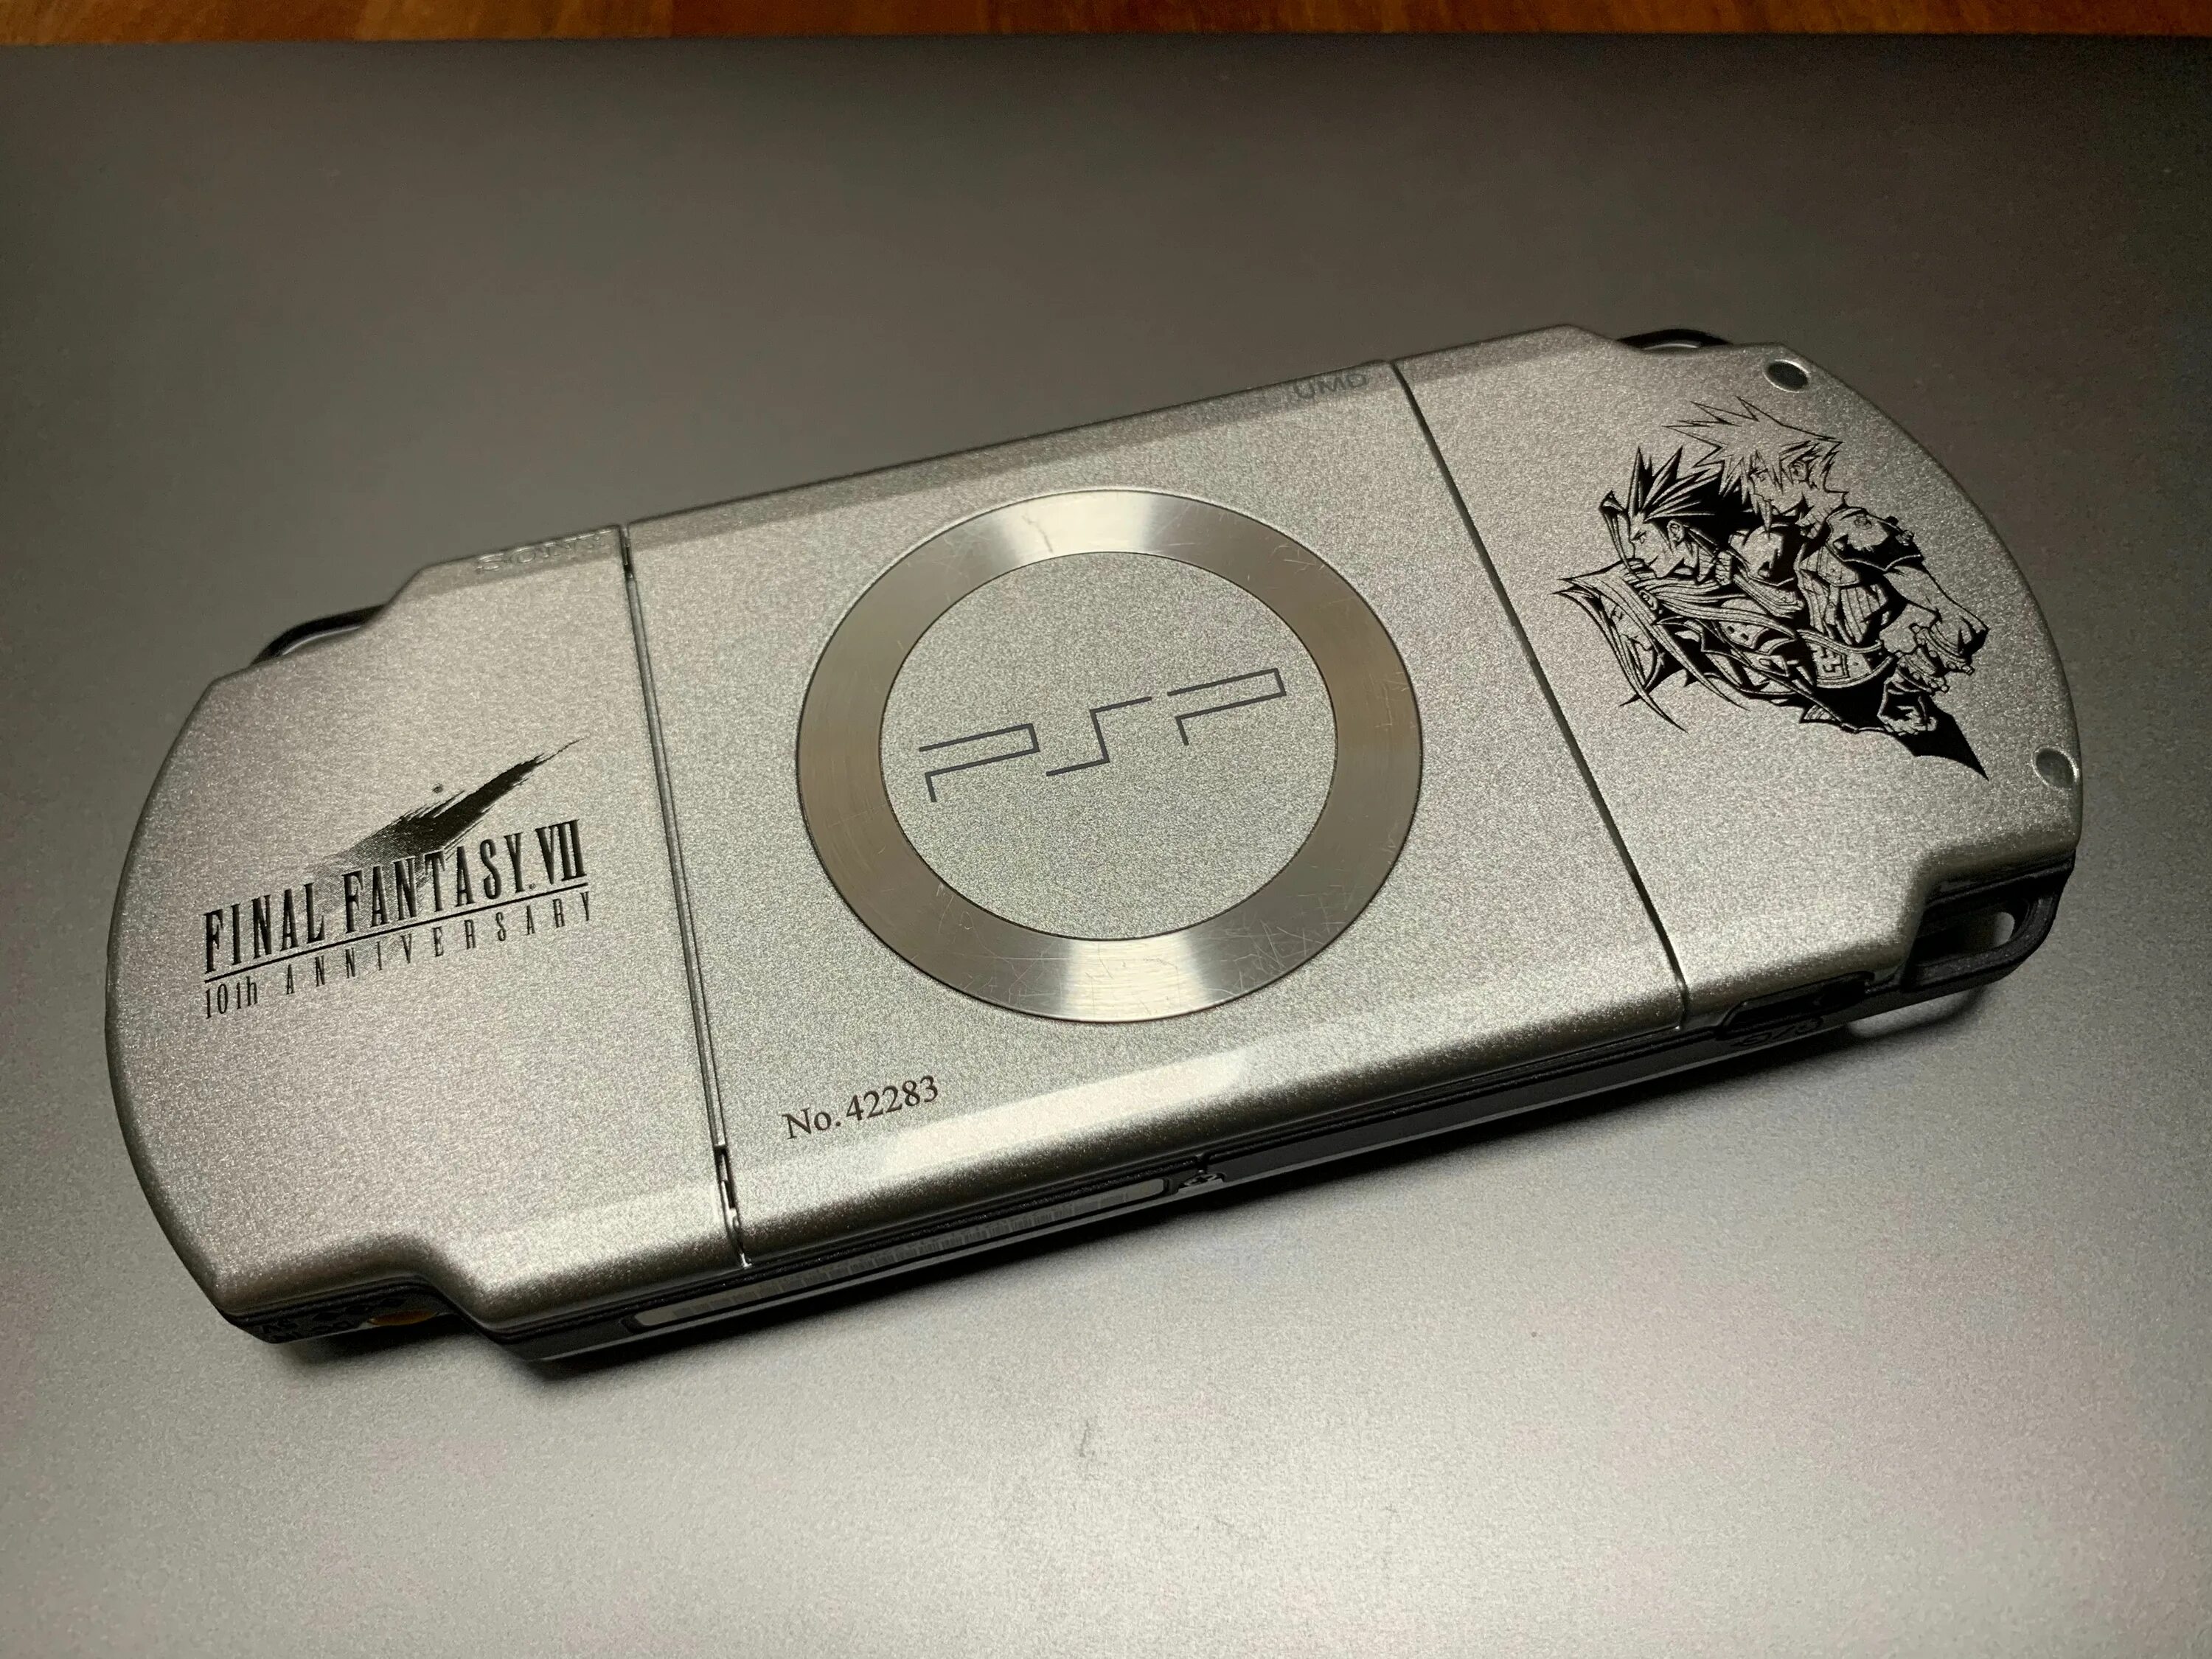 PSP 2000 Limited. Корпуса ПСП FF. Core limited